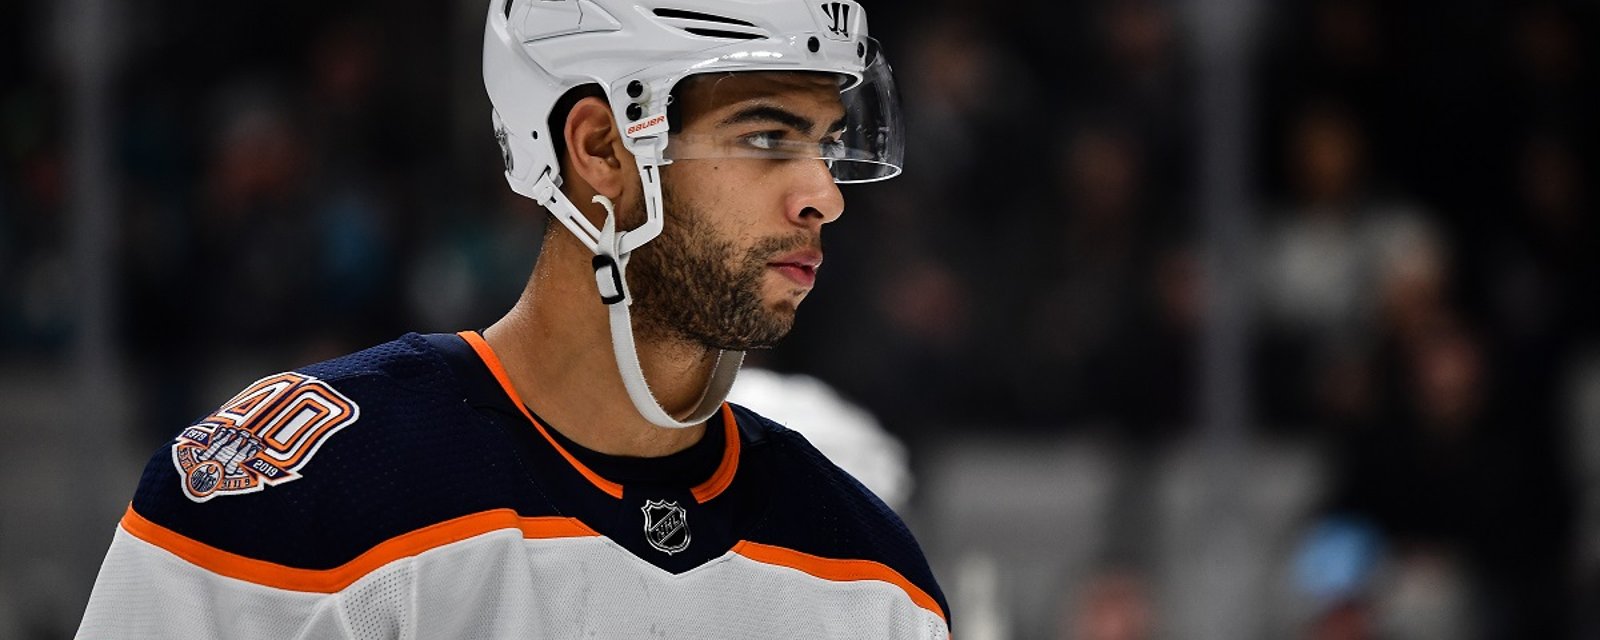 Darnell Nurse calls out the Oilers and it backfires horribly.